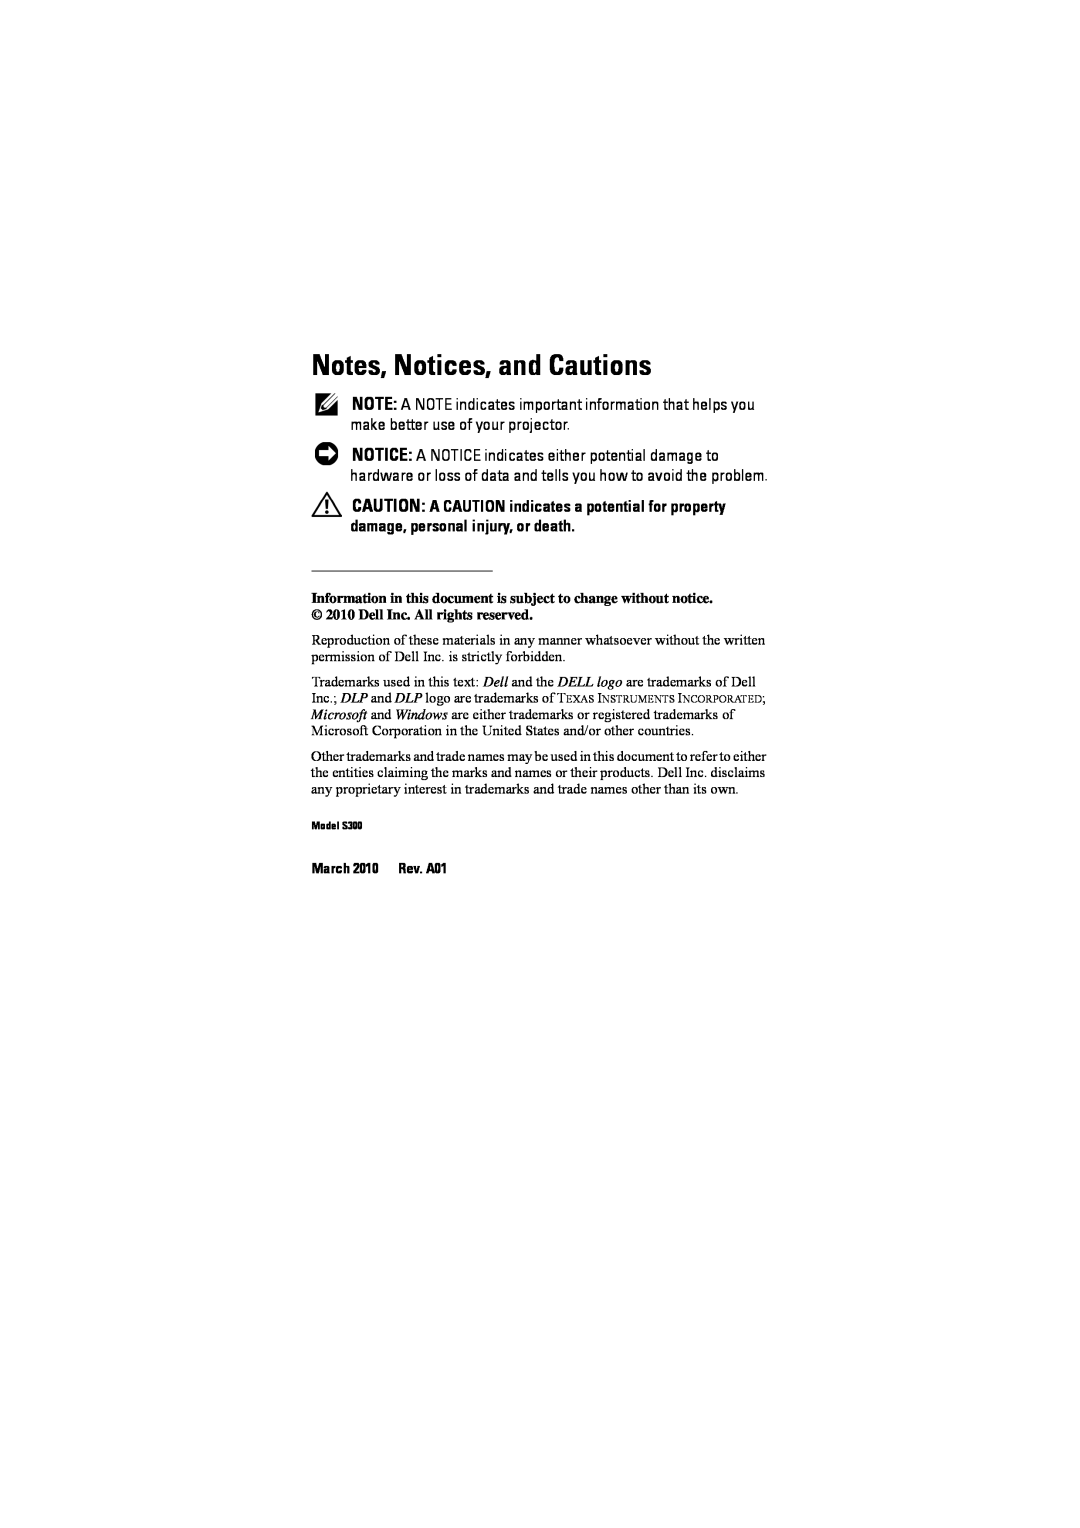 Dell S300 manual Notes, Notices, and Cautions, March 2010 Rev. A01 